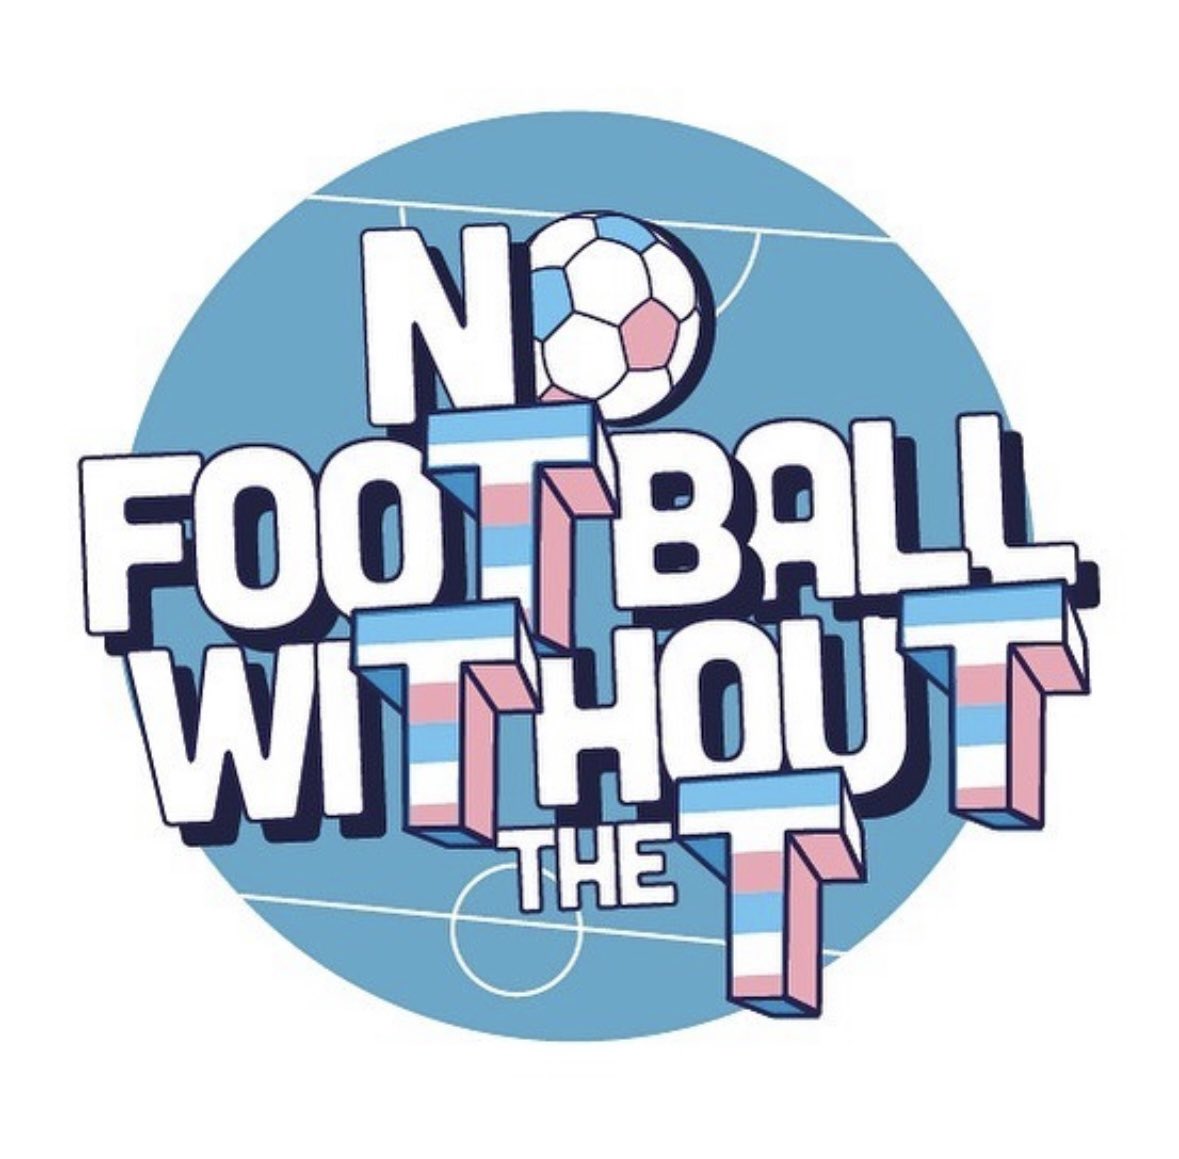 This week and every week! 

#NoFootballWithoutTheT